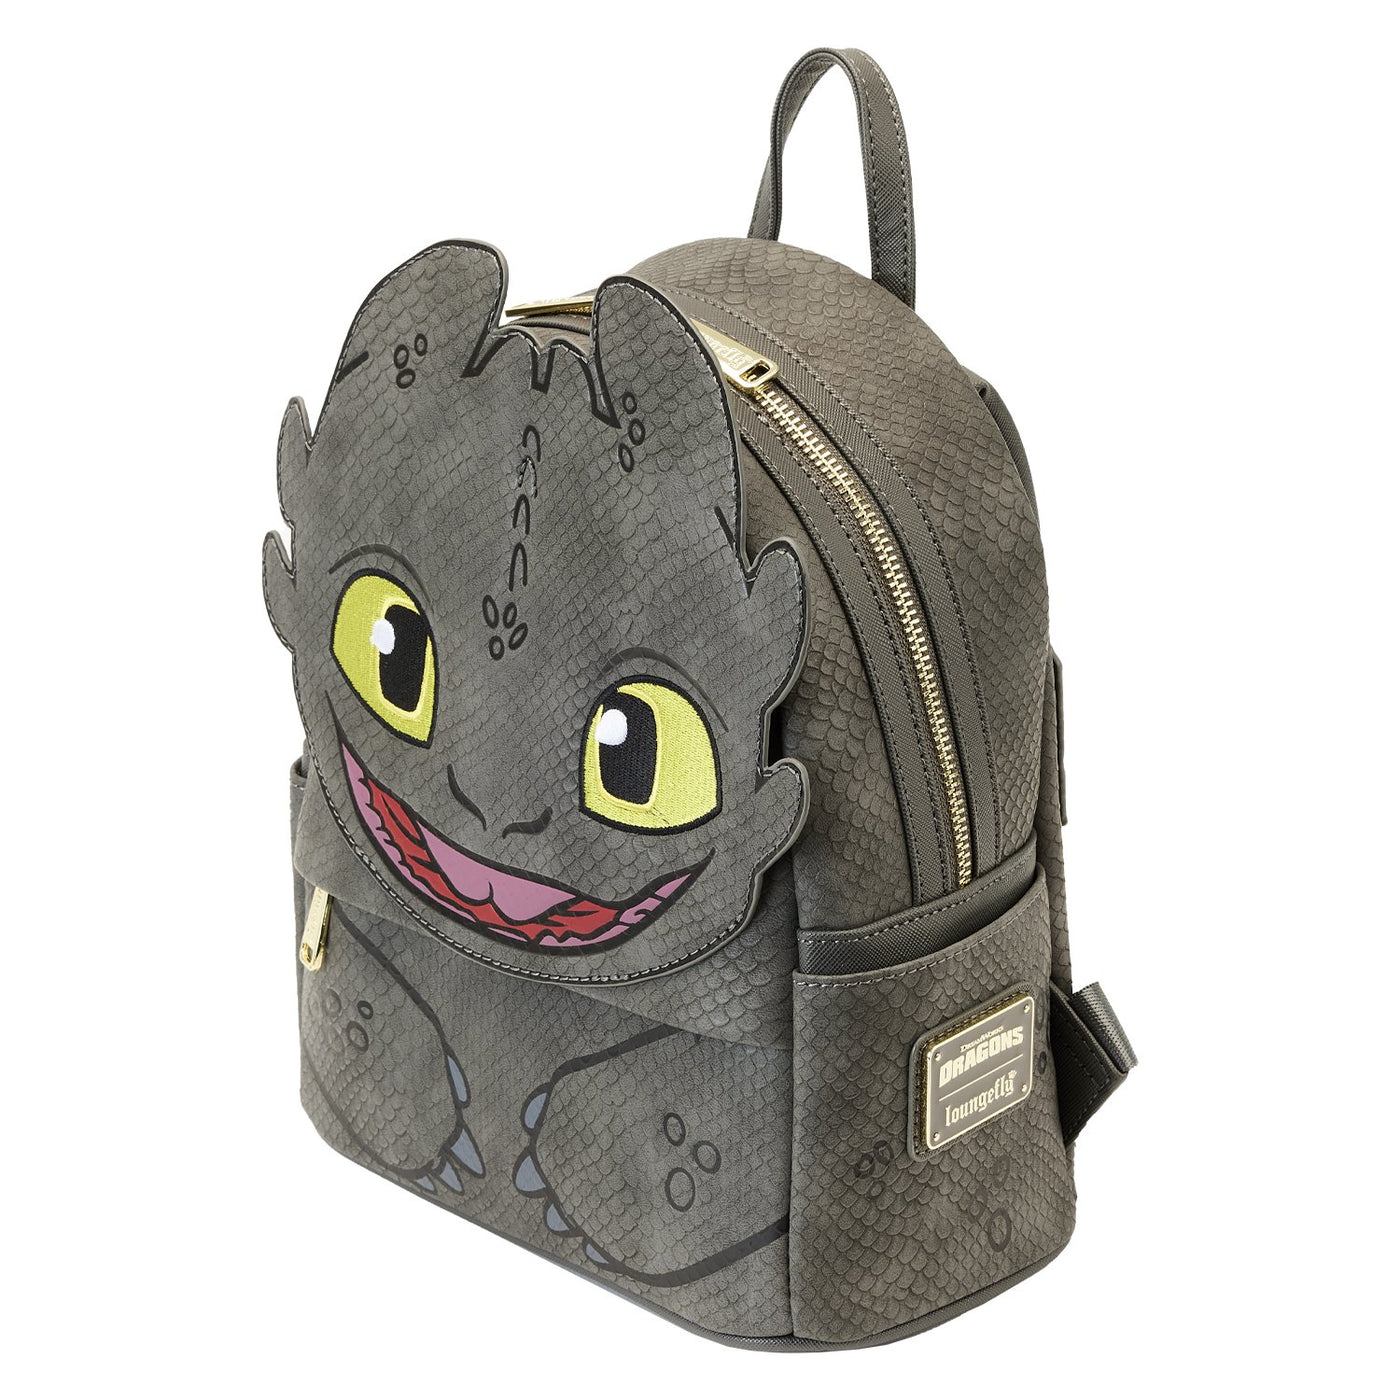 671803392670 - Loungefly Dreamworks How to Train Your Dragon Toothless Cosplay Mini Backpack - Top View